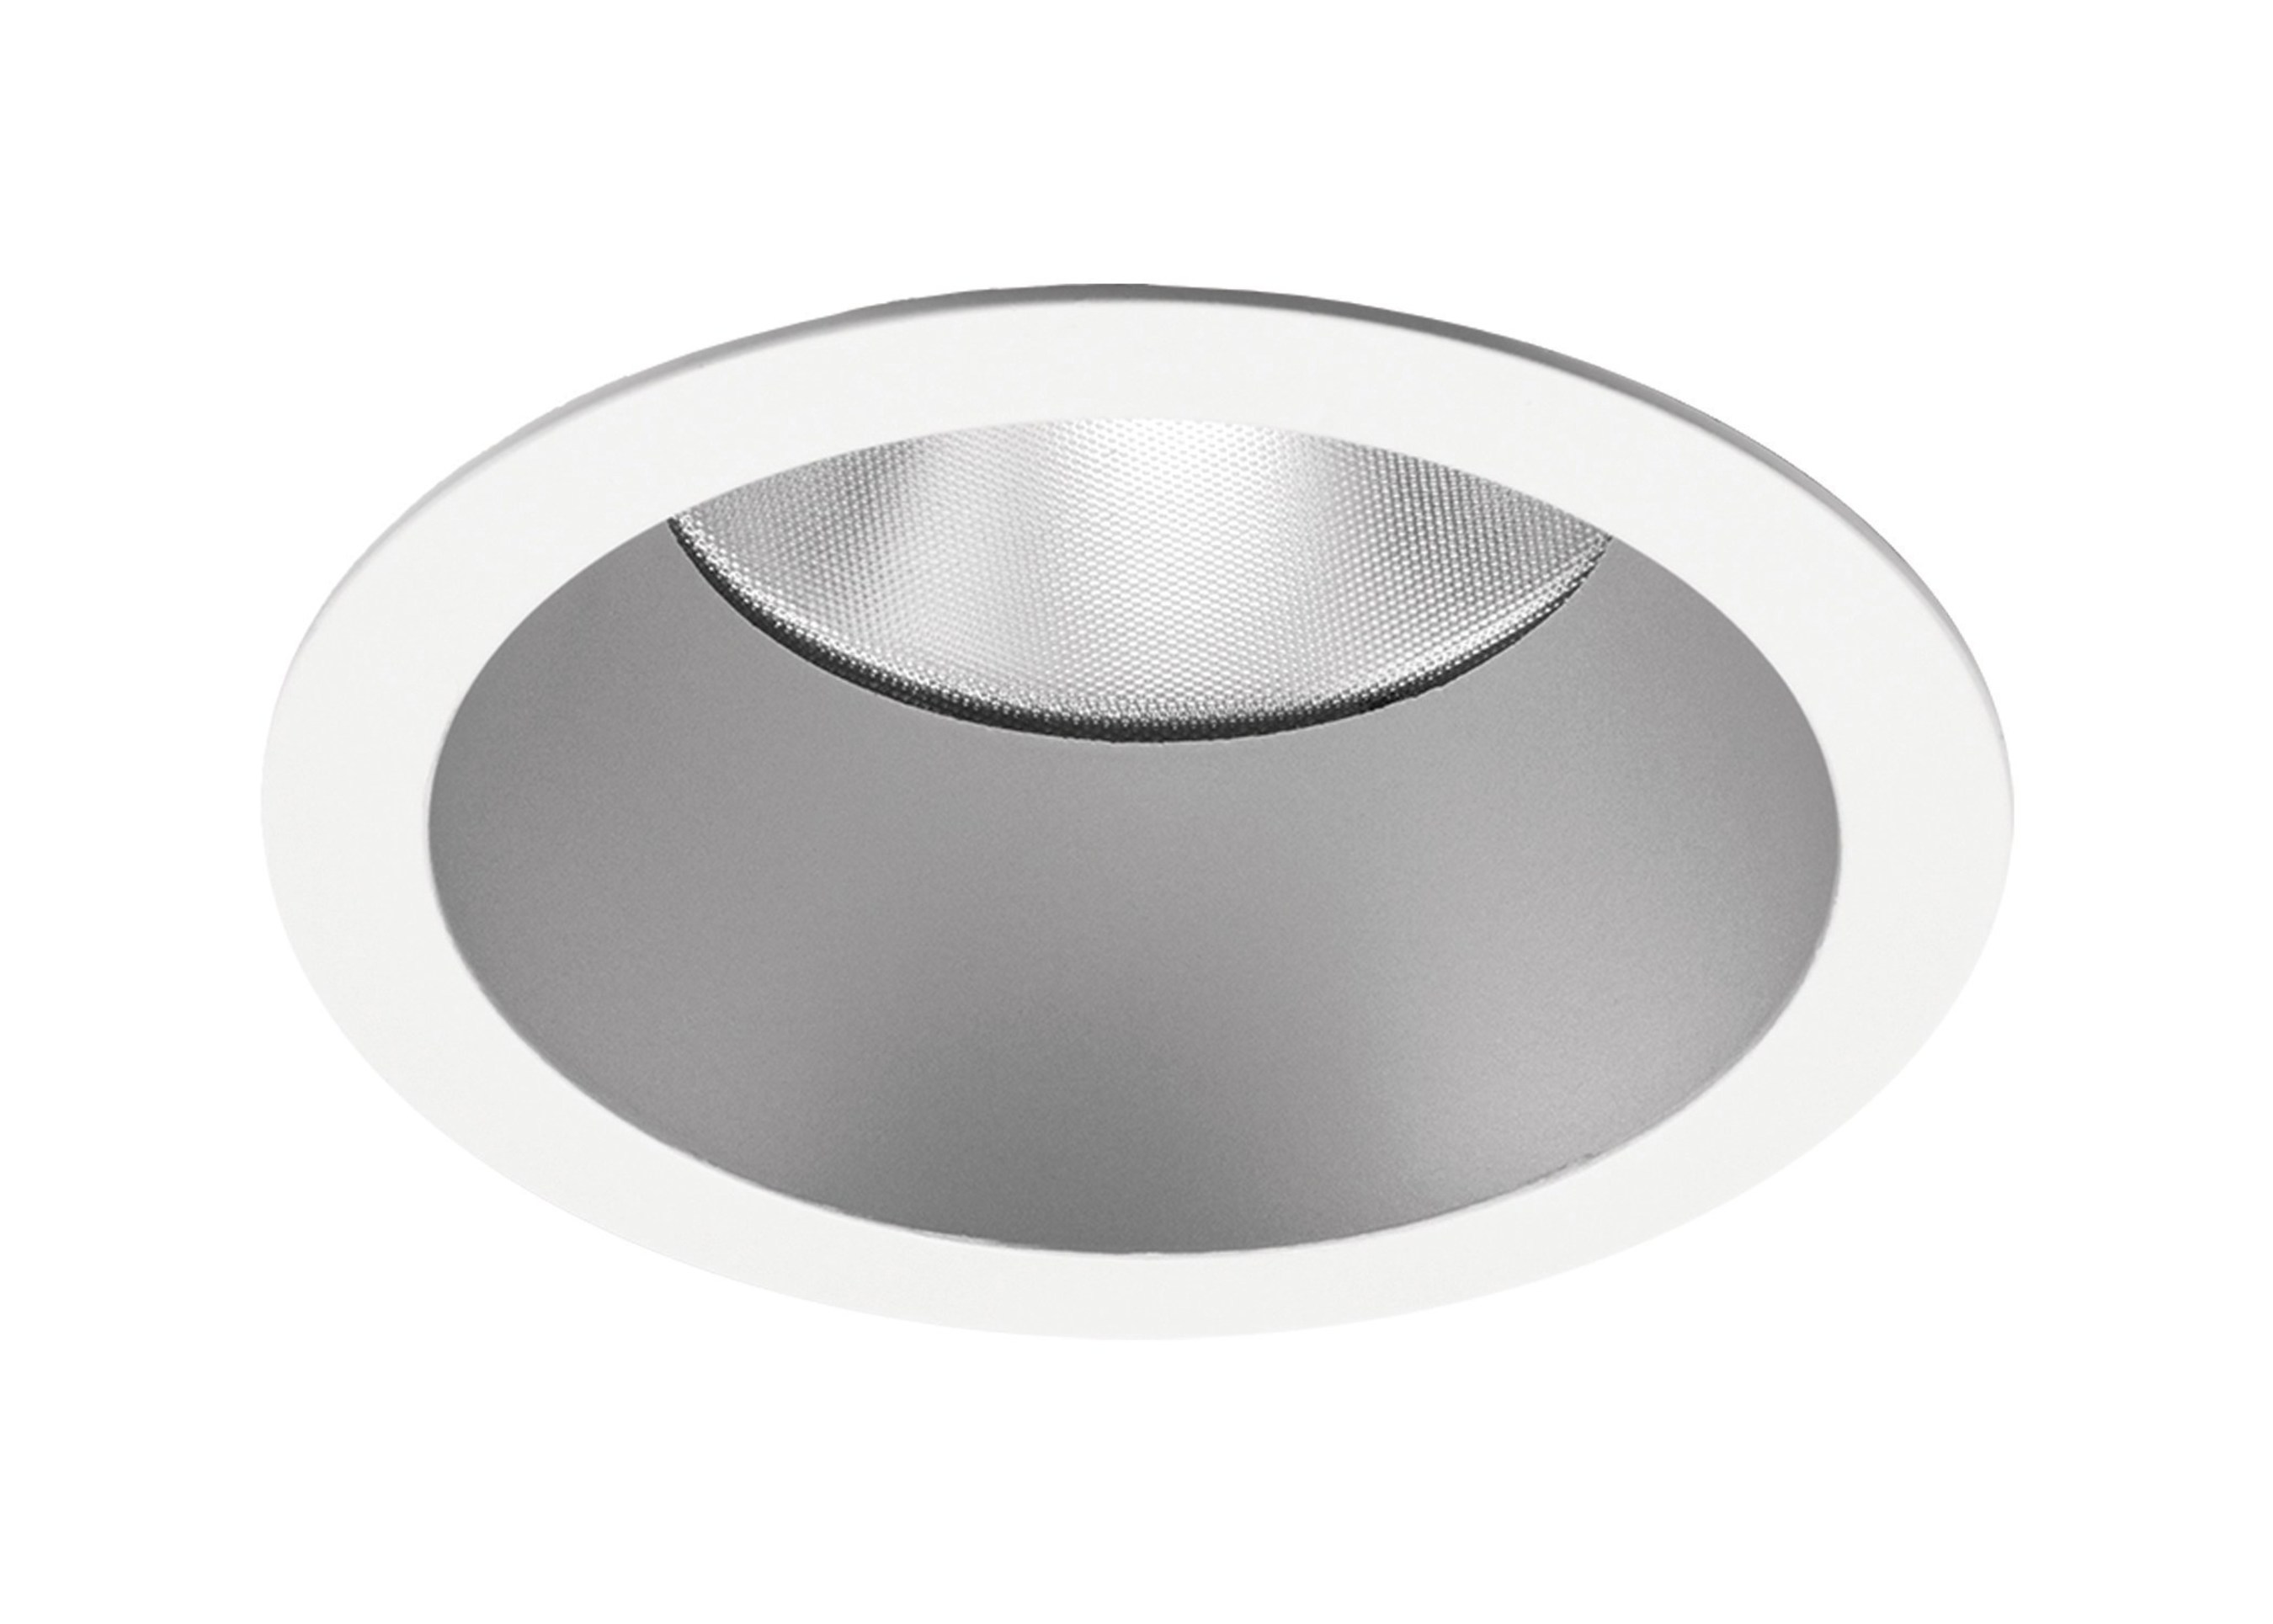 Amerlux adds Solite Lens to Evoke and Hornet HP Downlight families, the subtle clear choice for glare-free, narrow beams